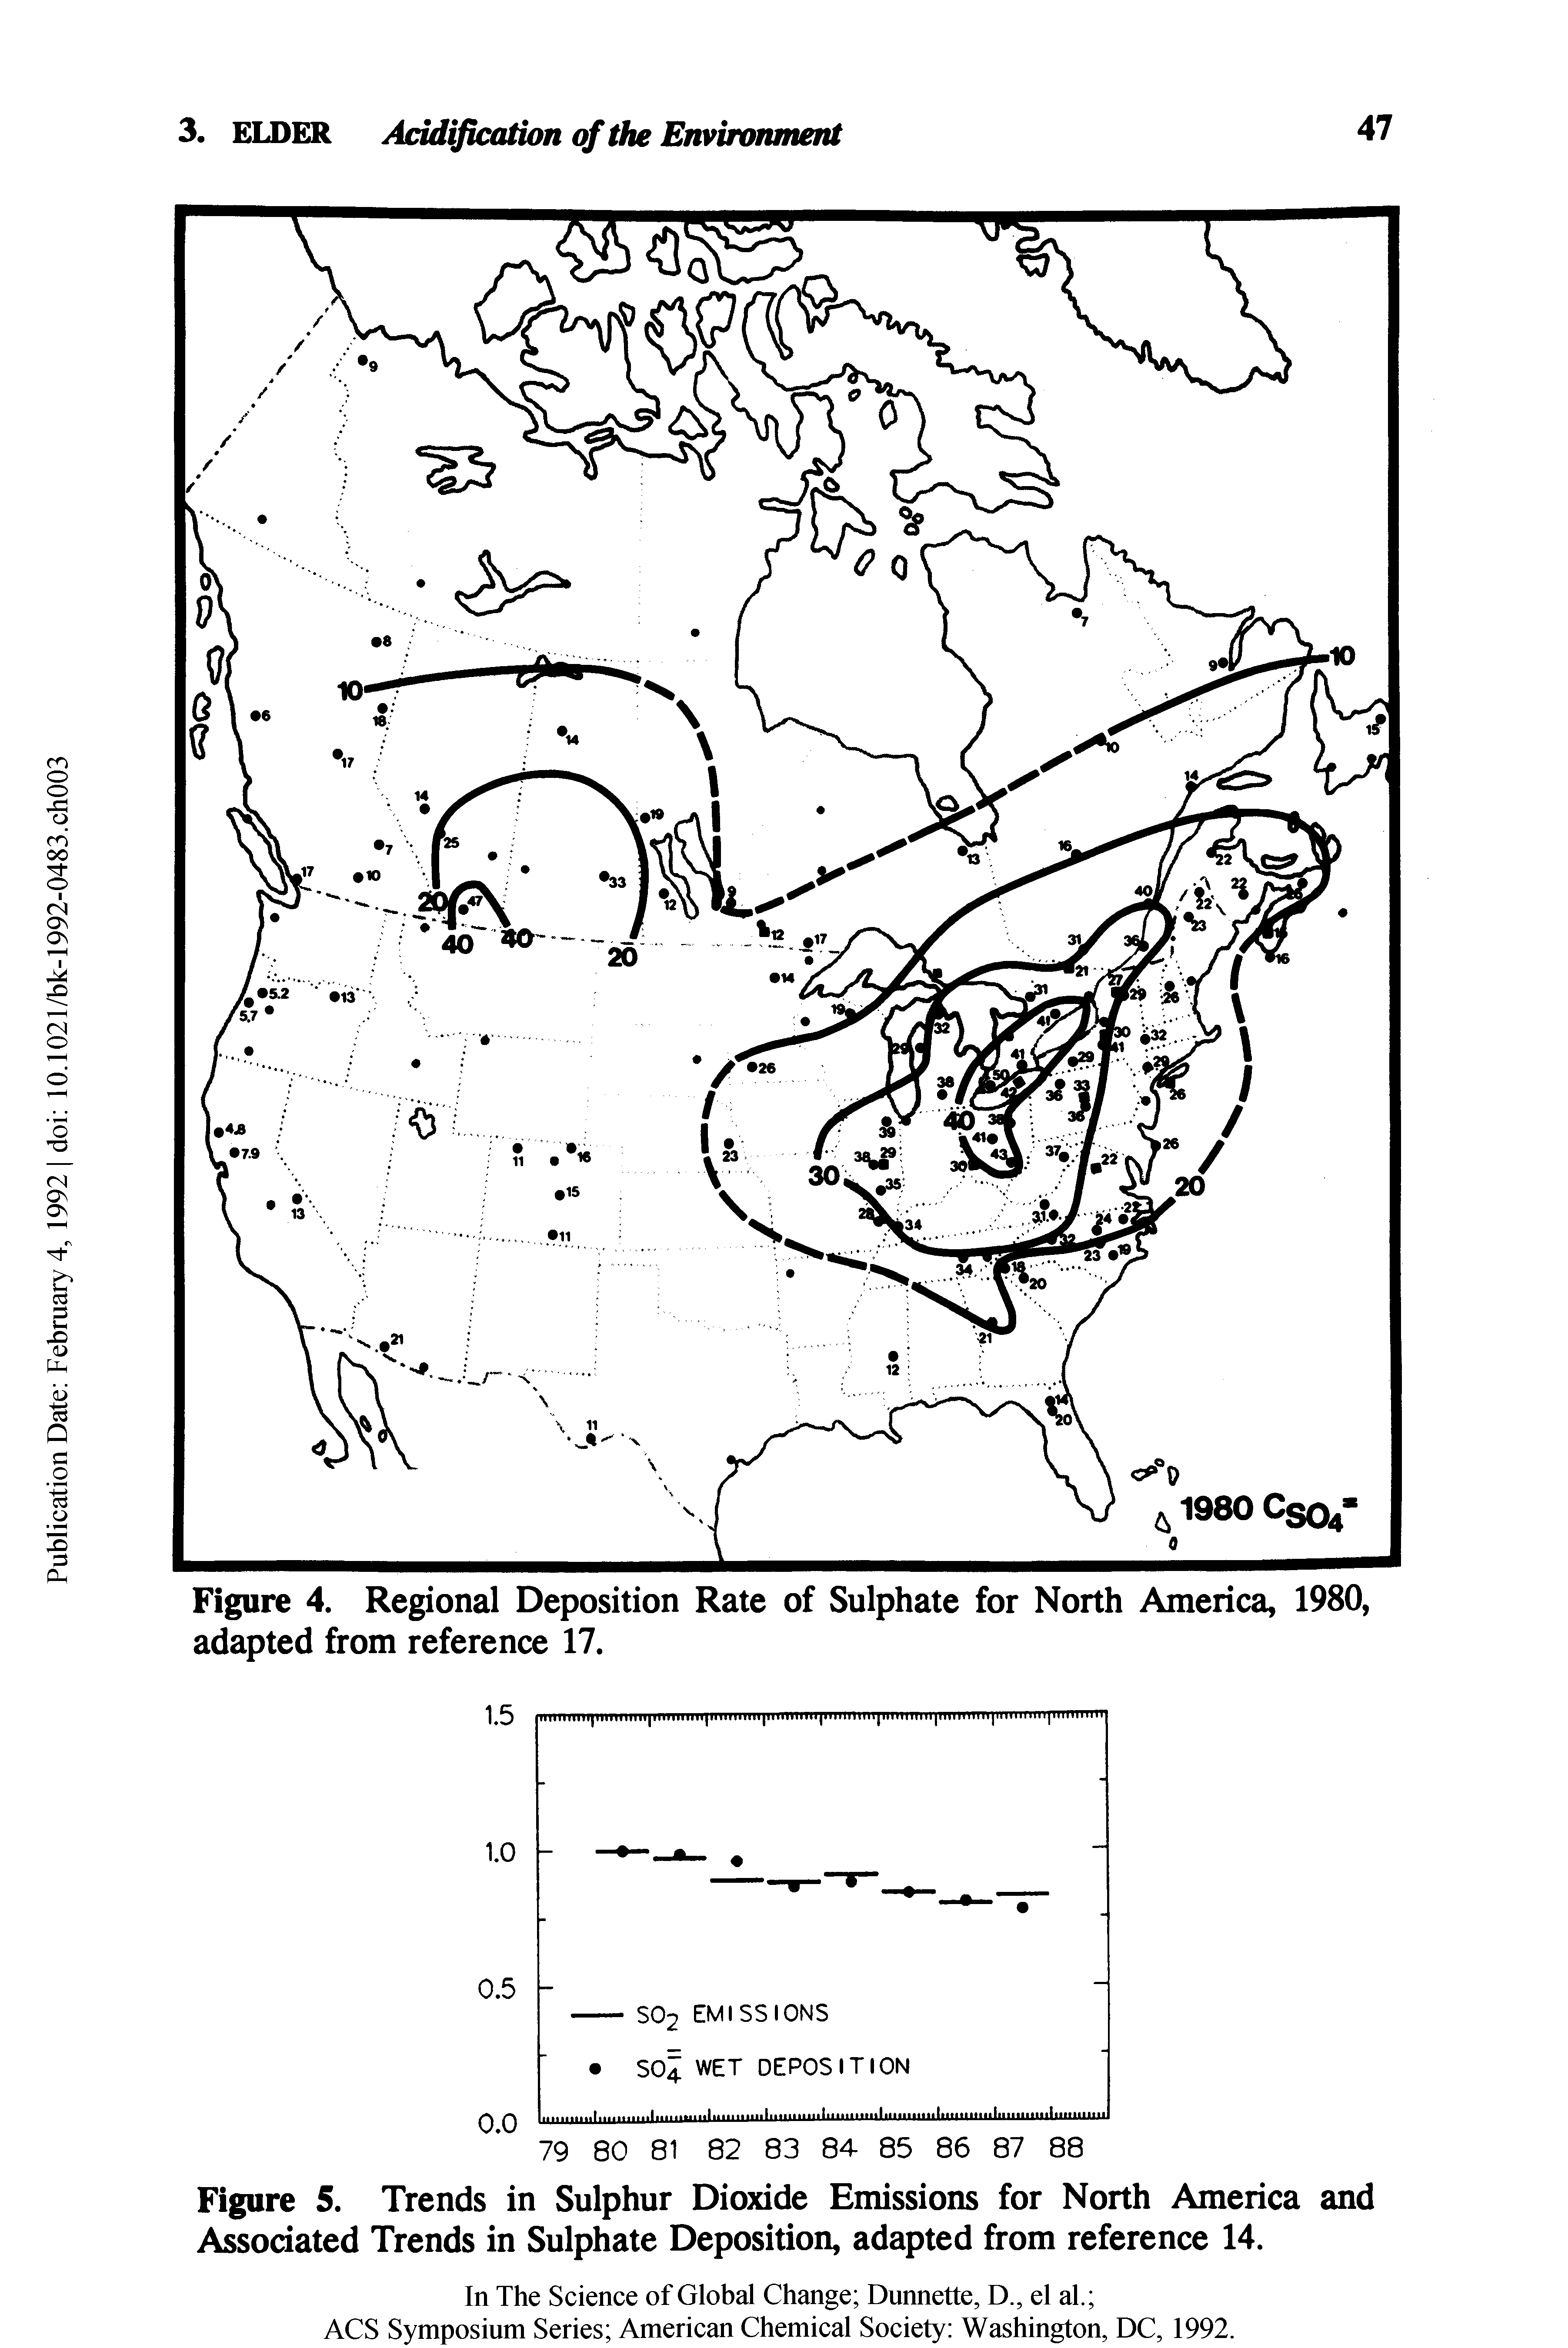 Figure 4. Regional Deposition Rate of Sulphate for North America, 1980, adapted from reference 17.